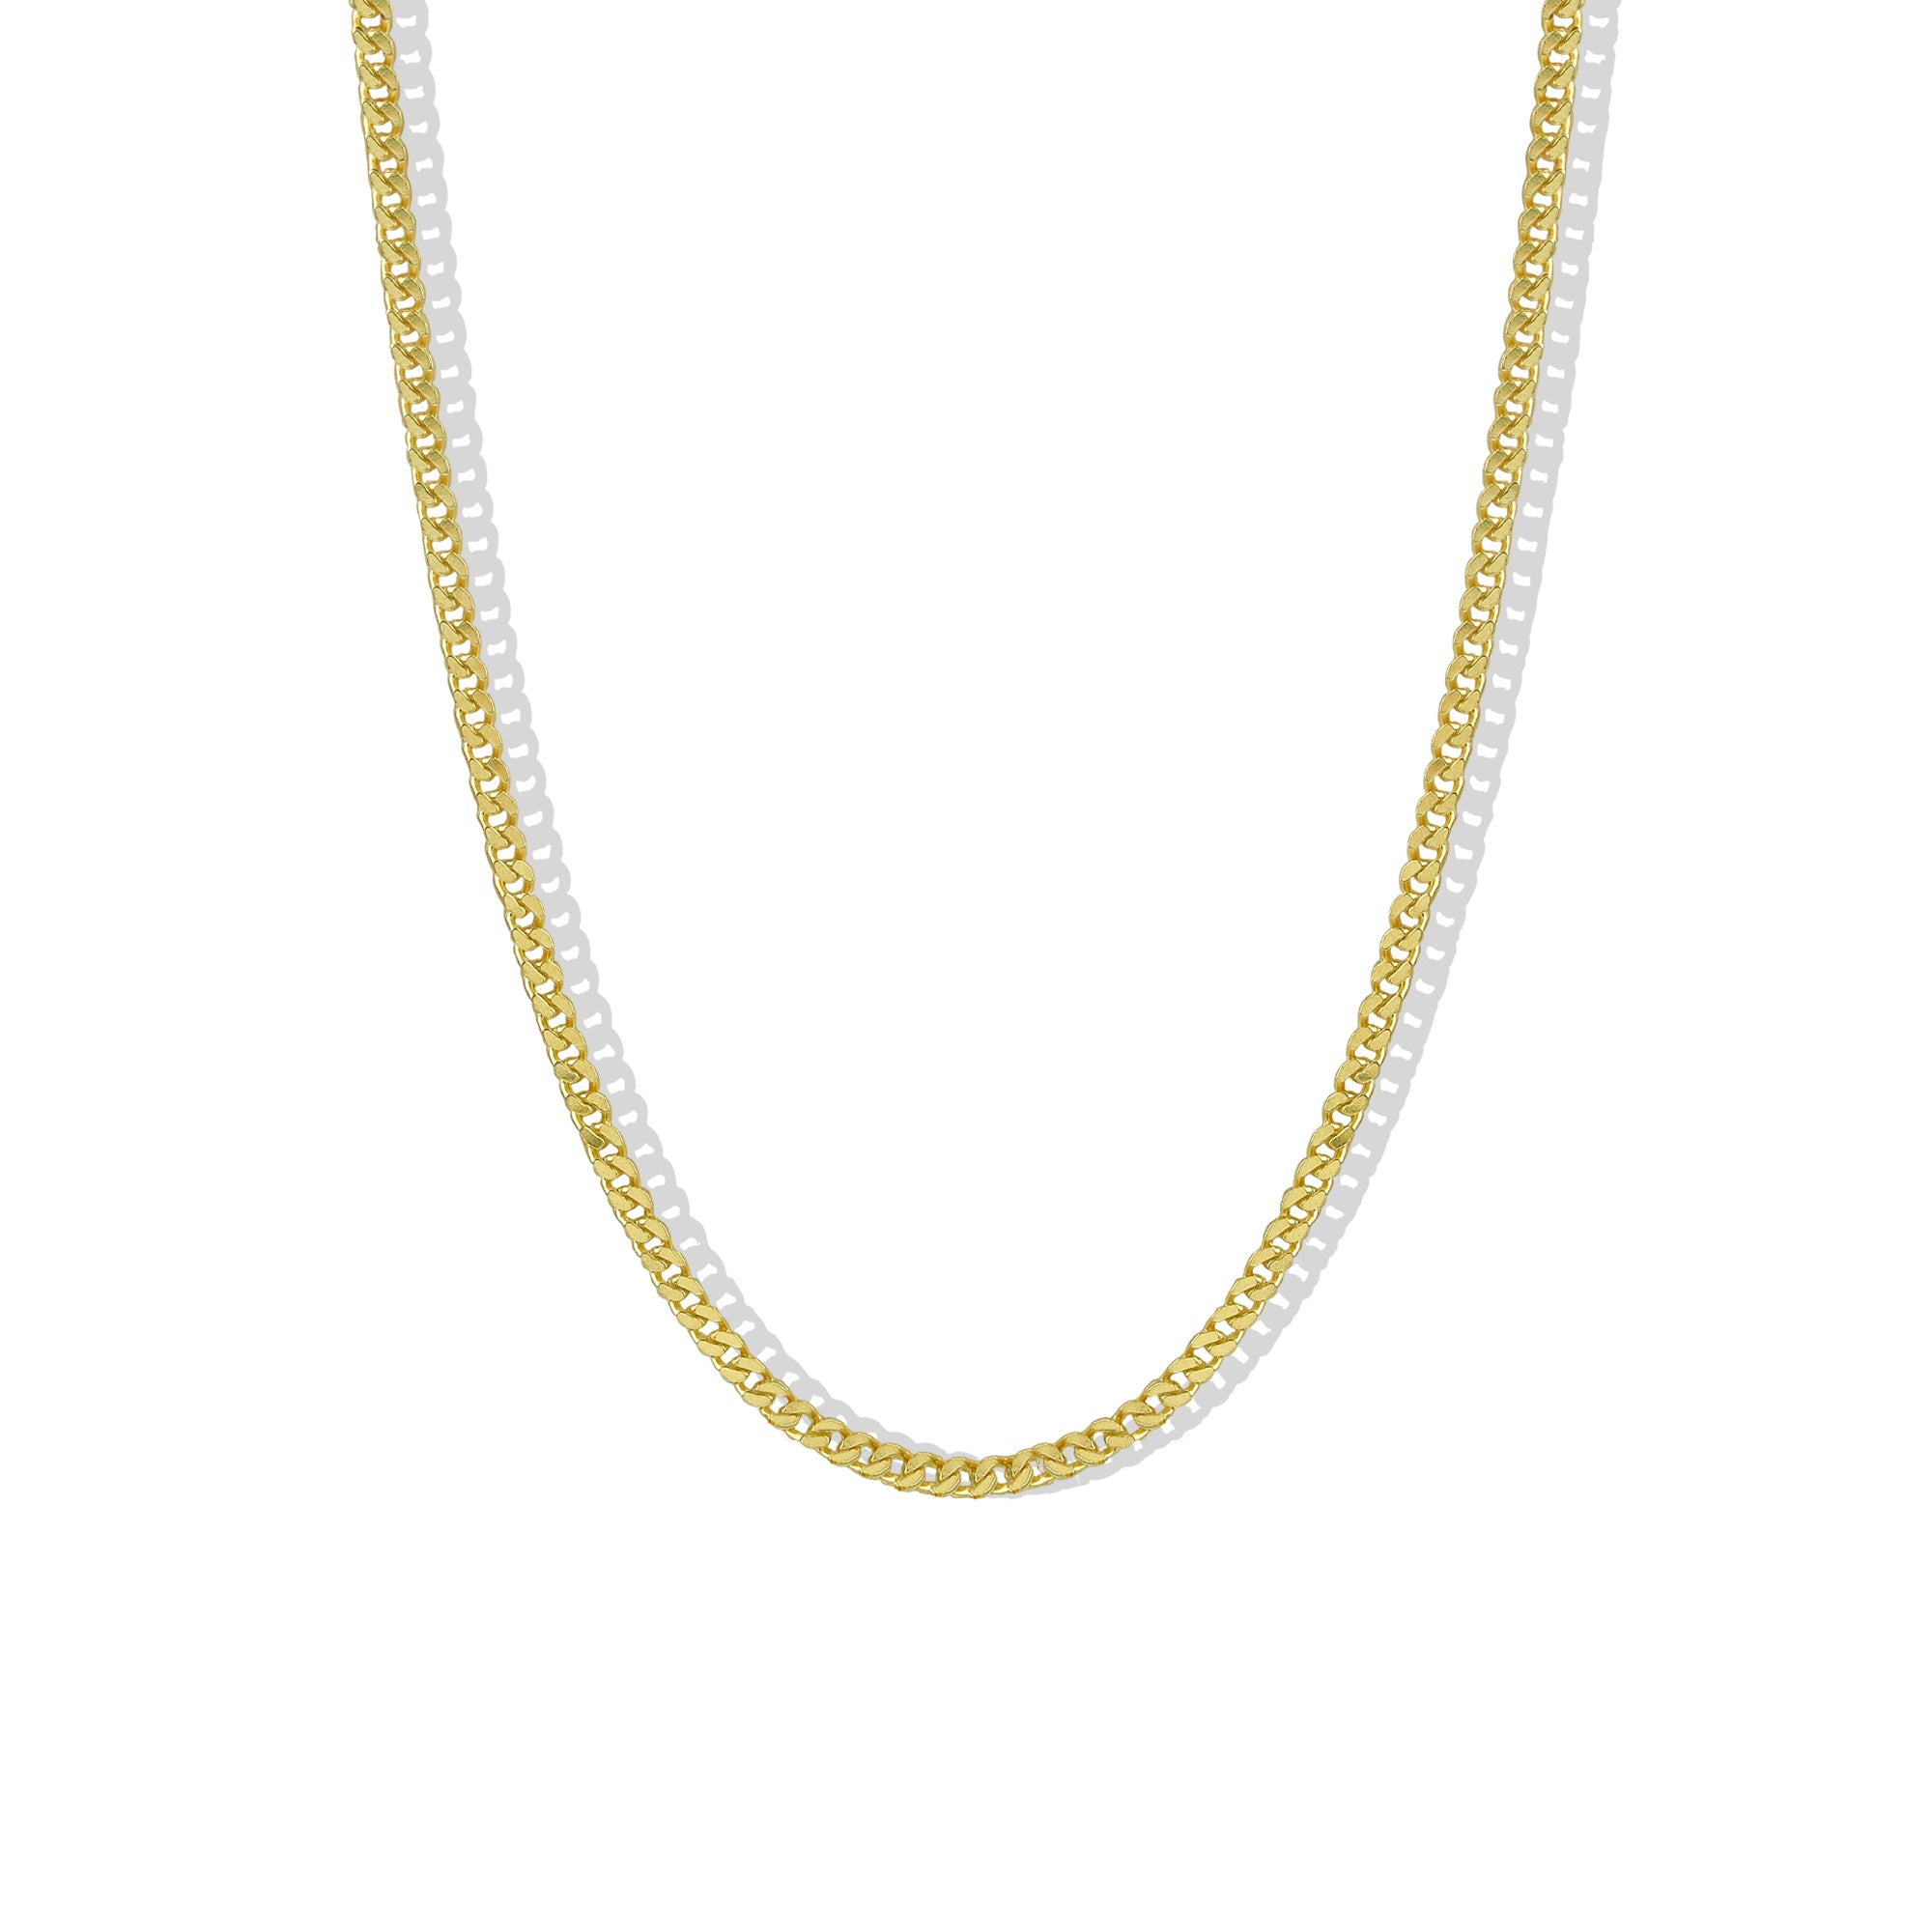 THE SERGIA CHAIN NECKLACE